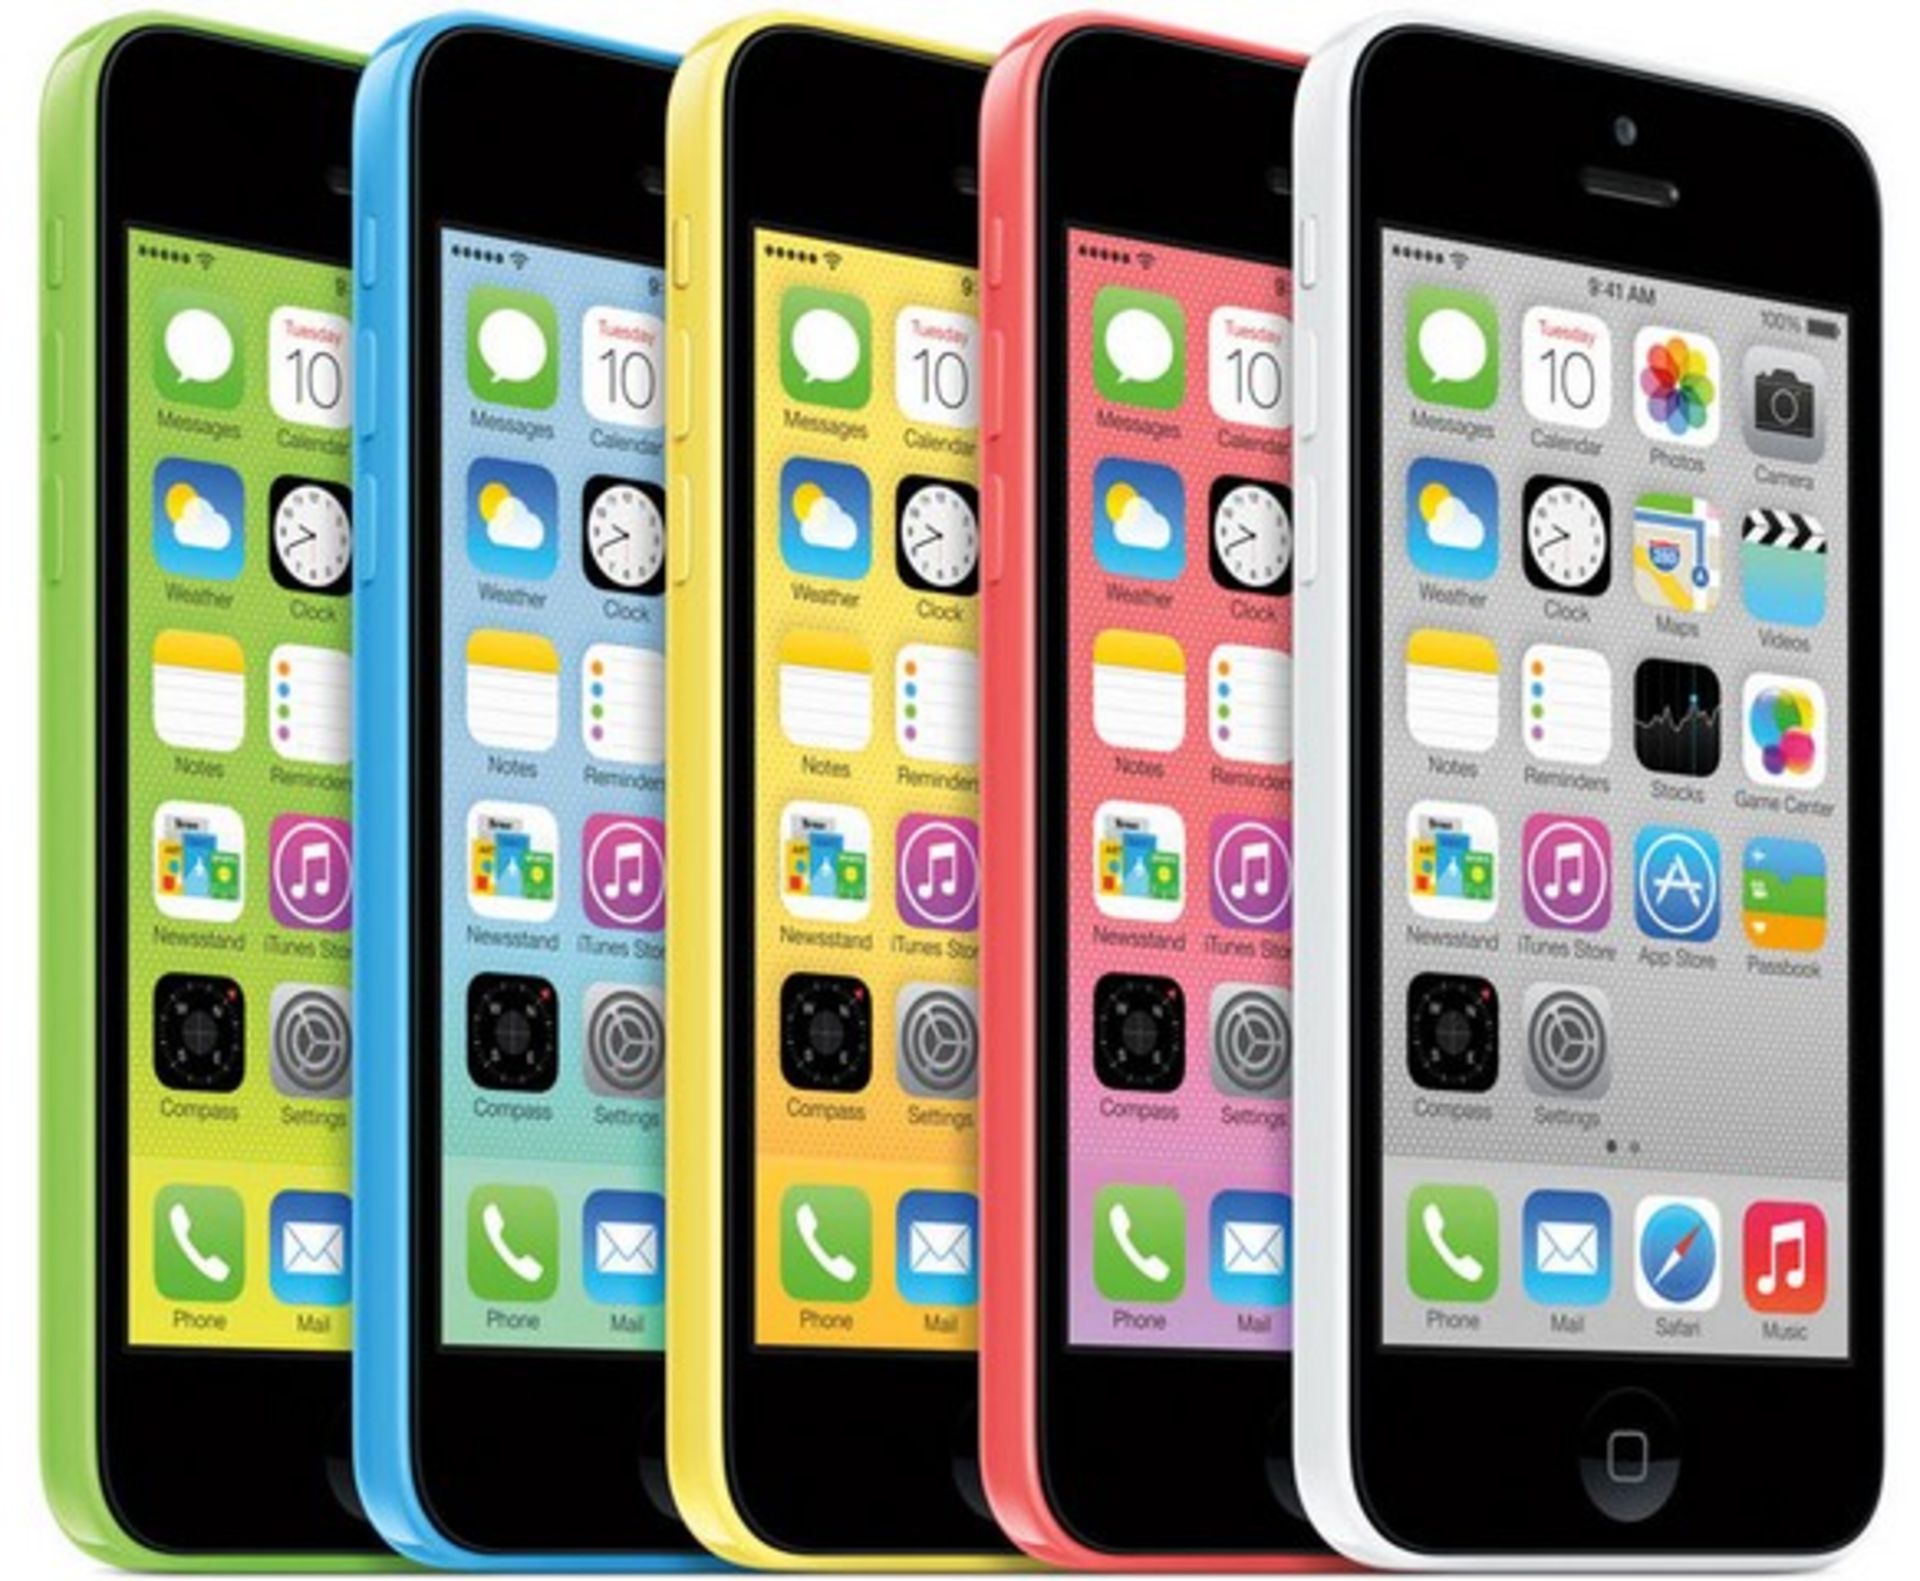 Grade A Apple iPhone 5C Unlocked 8GB - Apple Box + Some Accessories - Colours May Vary - Item